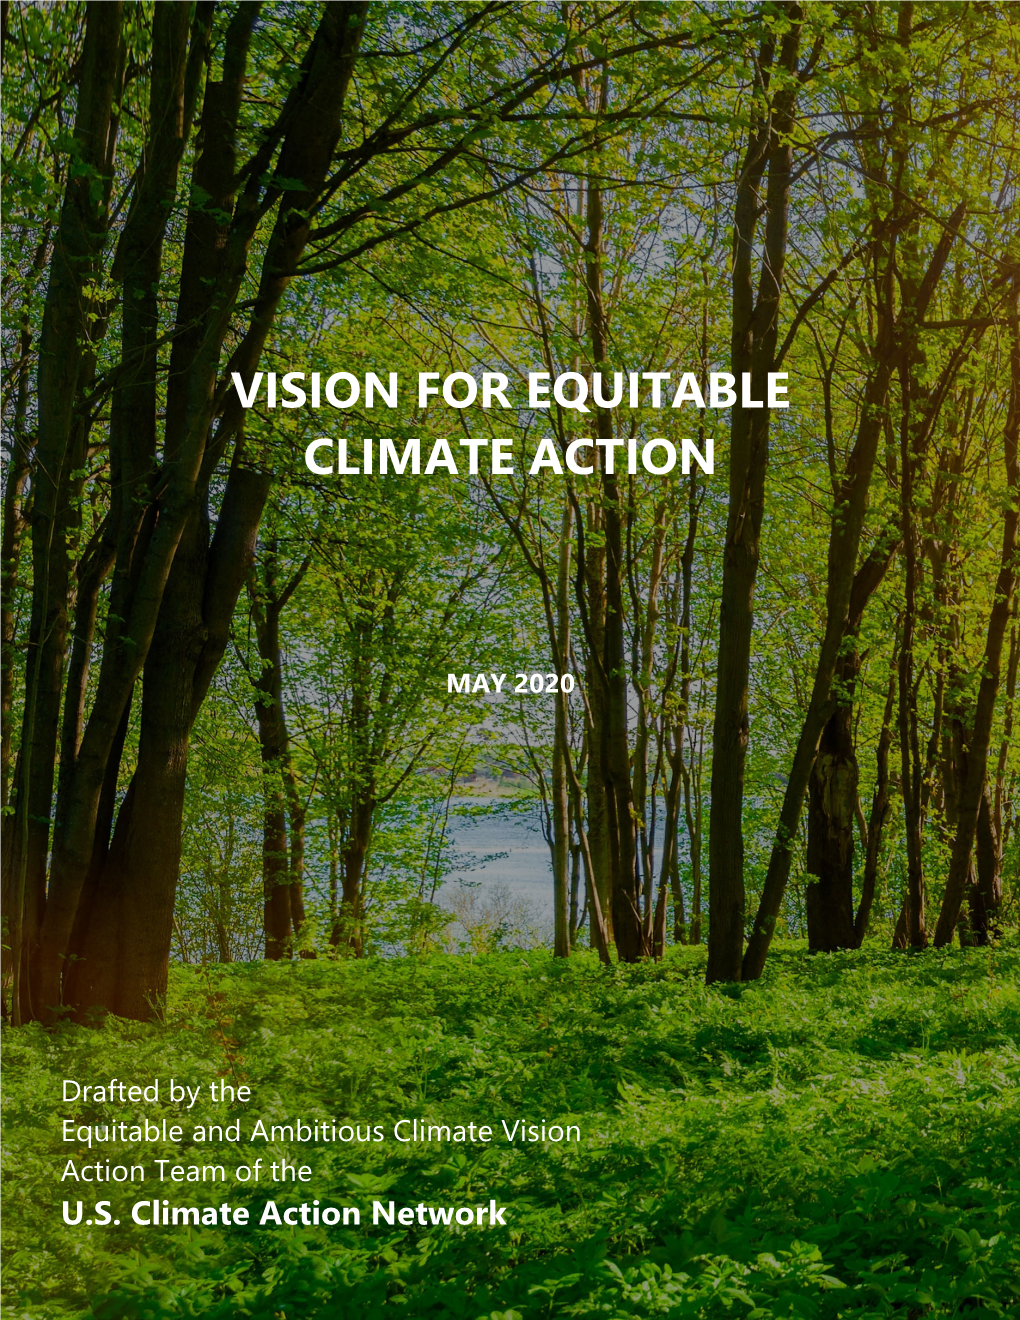 The Vision for Equitable Climate Action